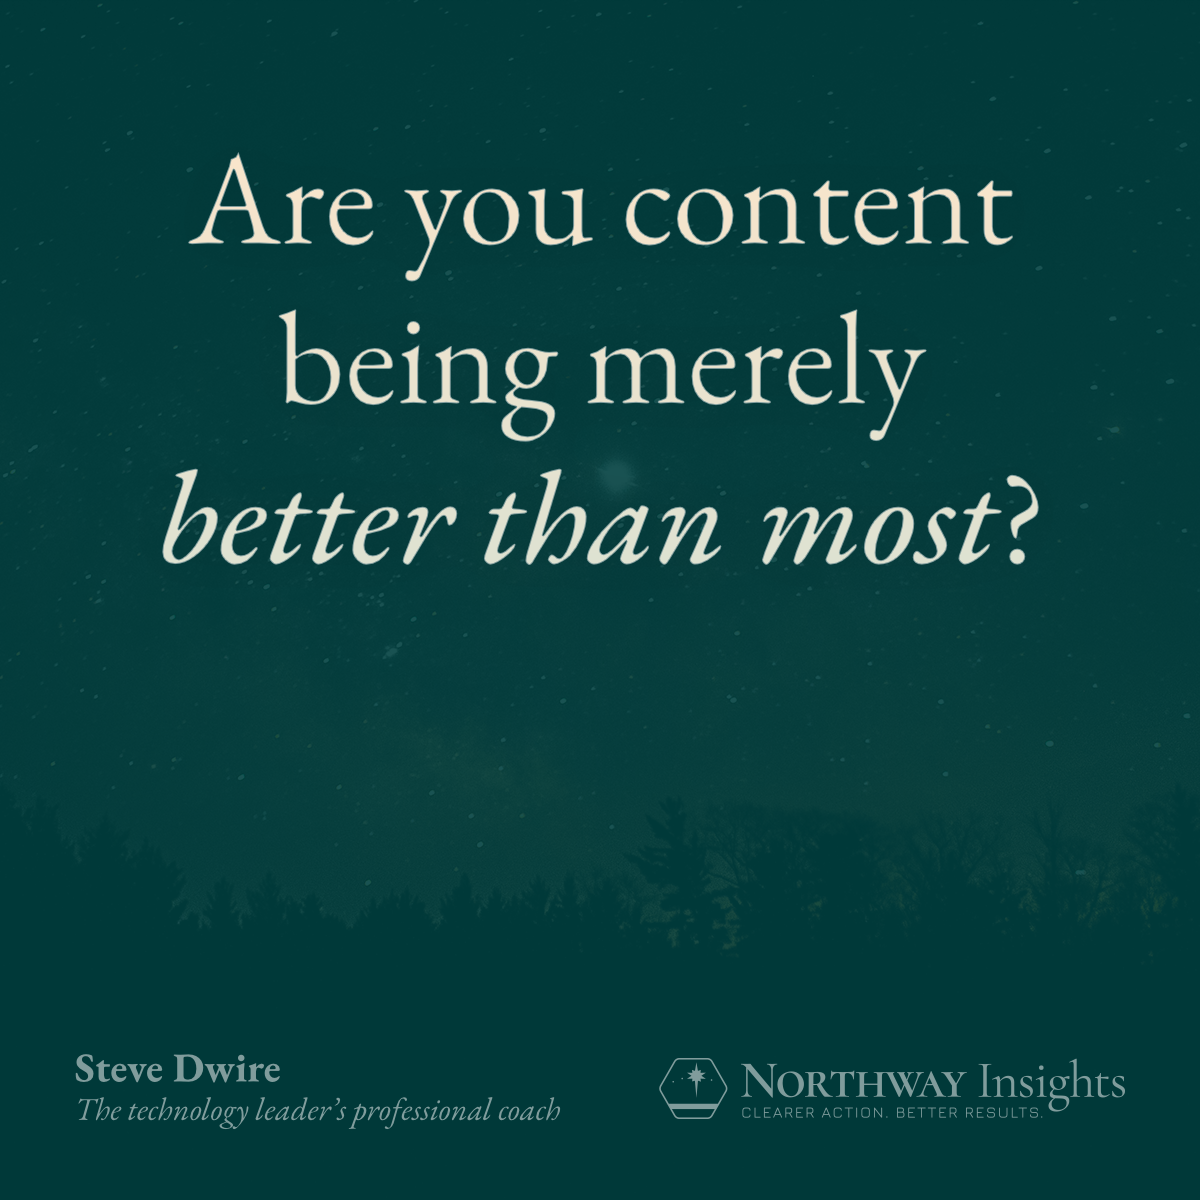 Are you content being merely better than most?